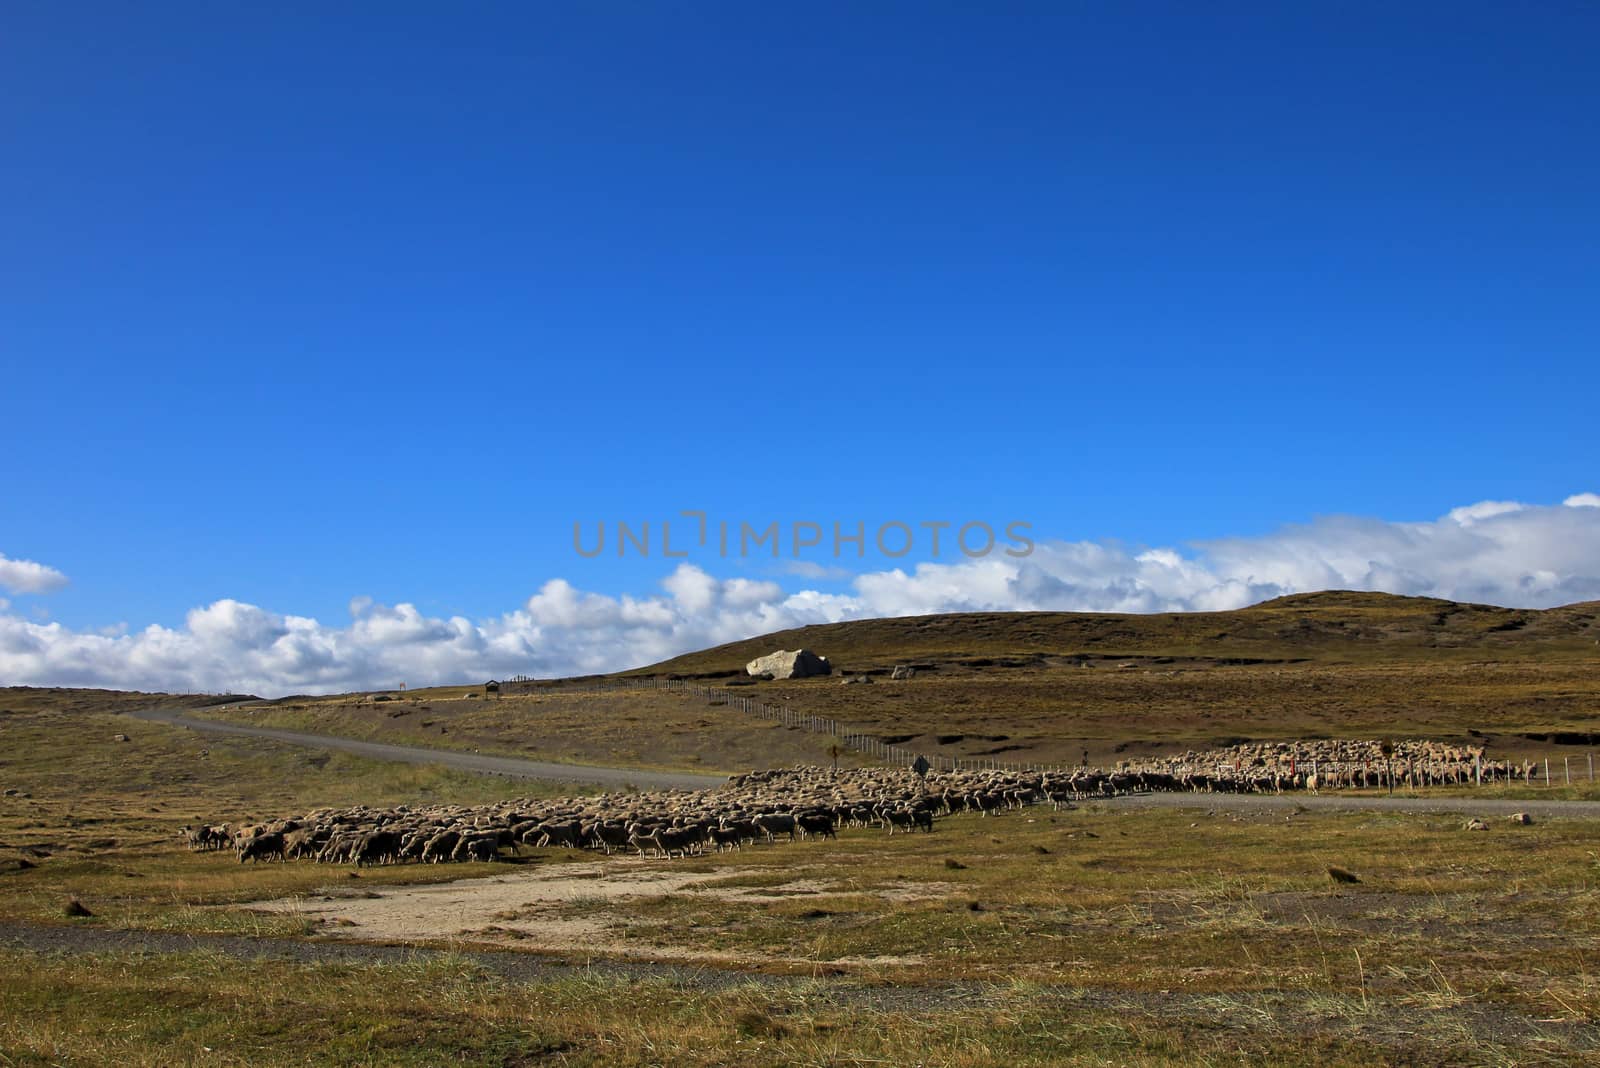 Herd of sheep near Porvenir, Patagonia, Chile by cicloco